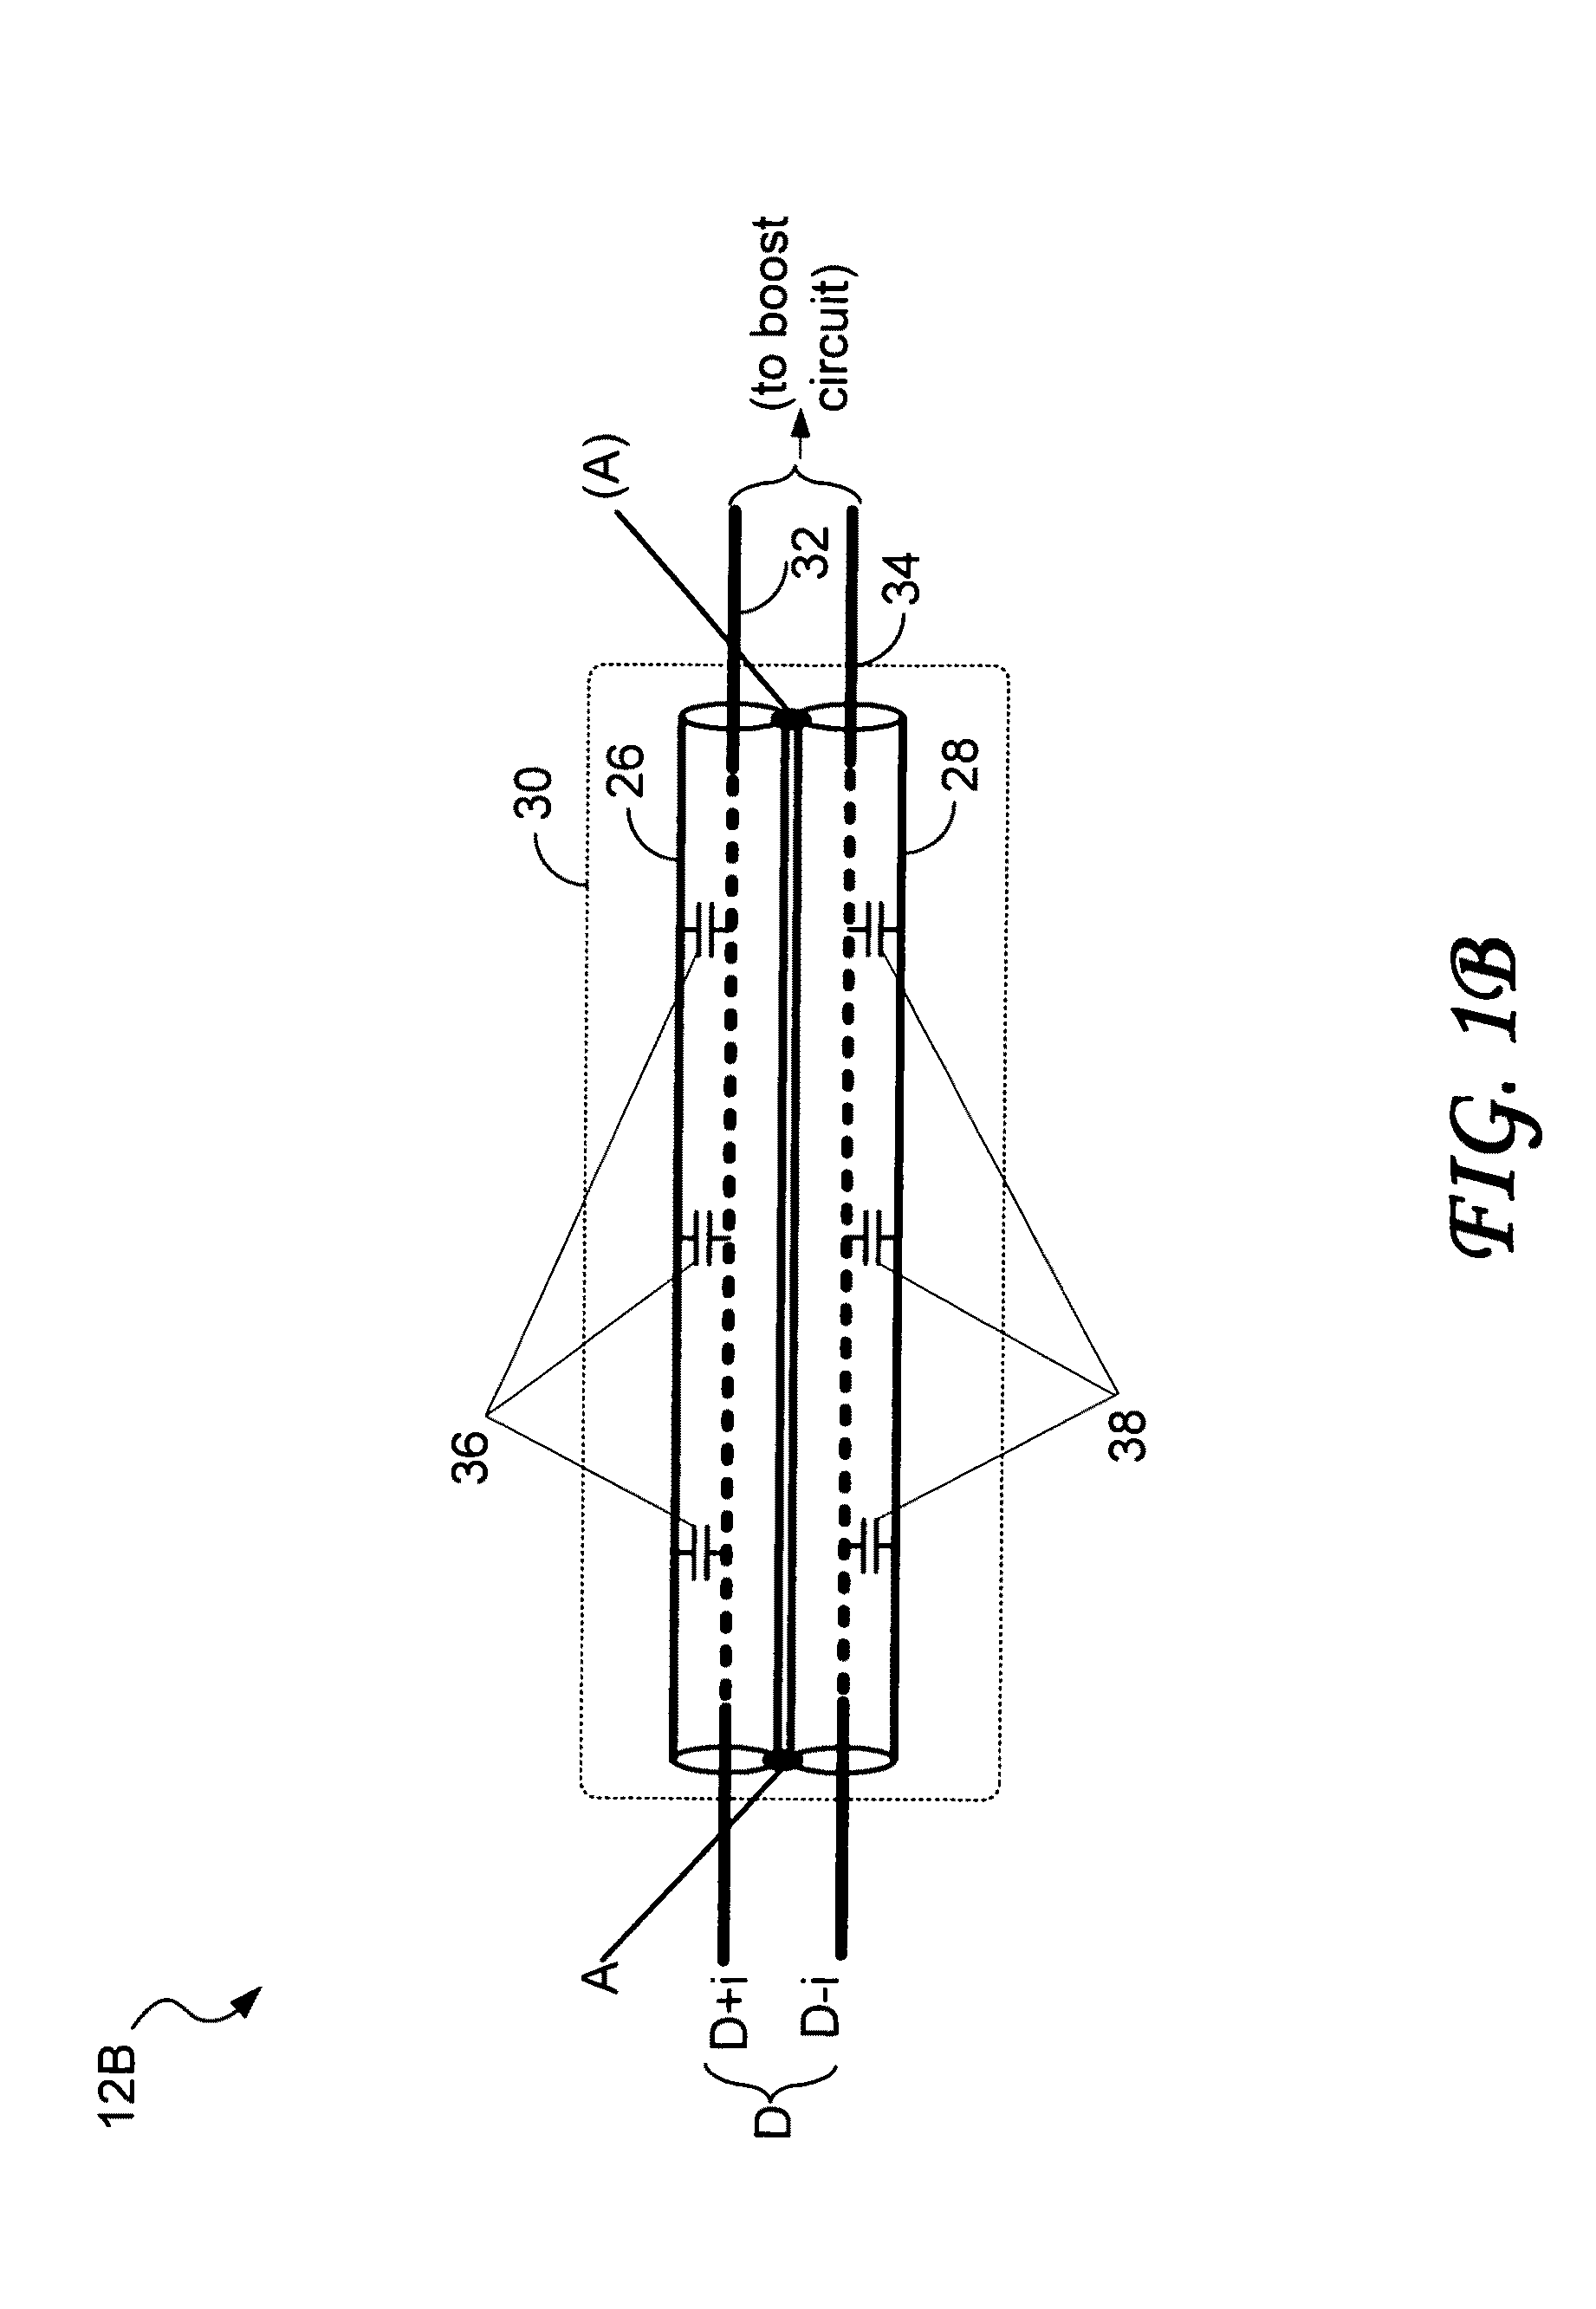 High speed data cable including a boost device for generating a differential signal